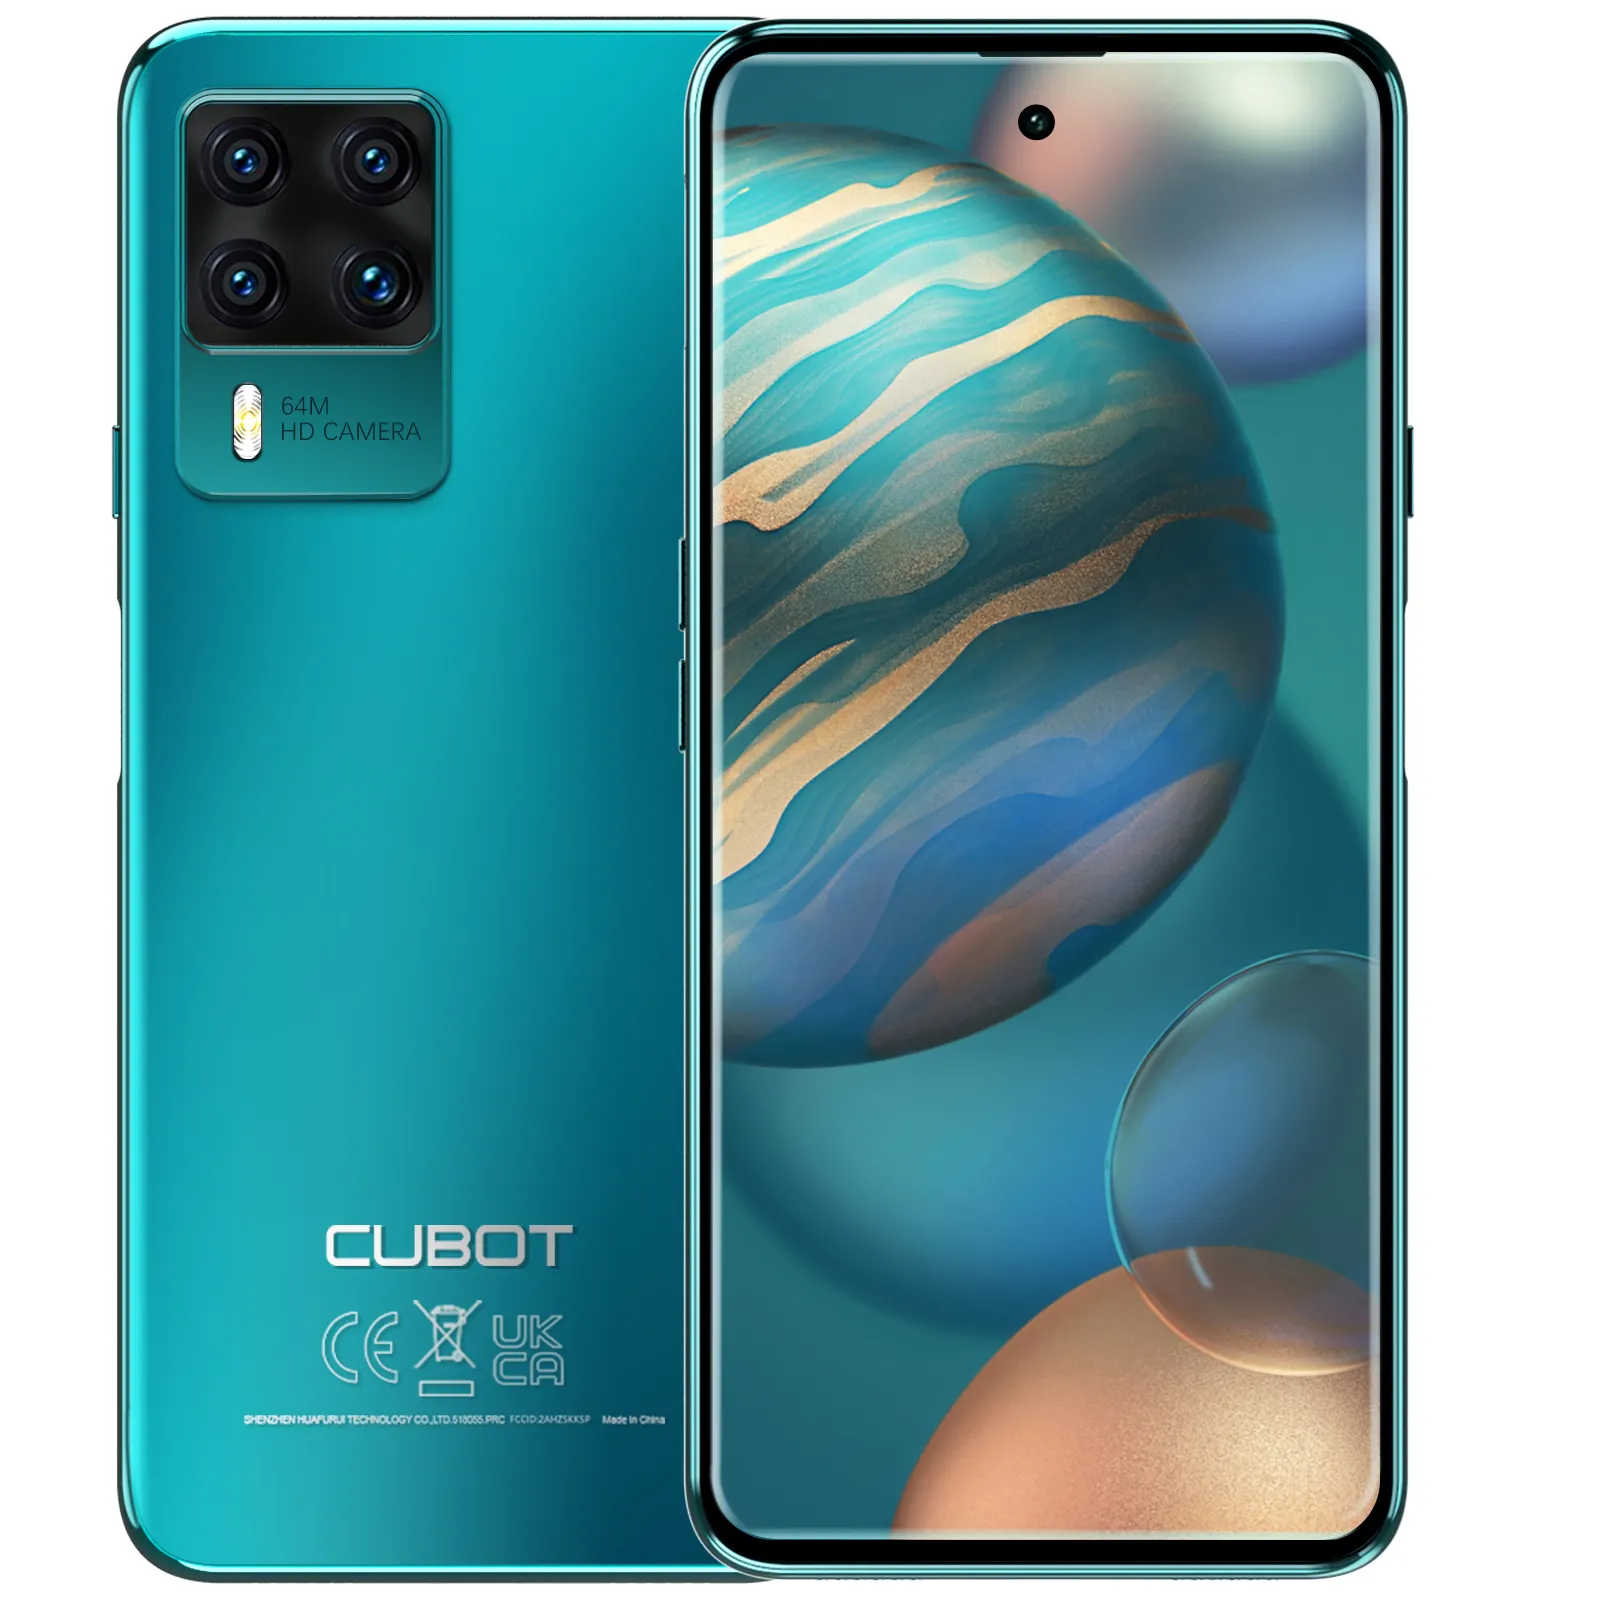 Cubot X50 Smartphone 8G 128G 256GB 32MP Selfie 64MP 4500mAh 6.67" Cell Phone Global 4G LTE Cubot X50 Mobile Phone